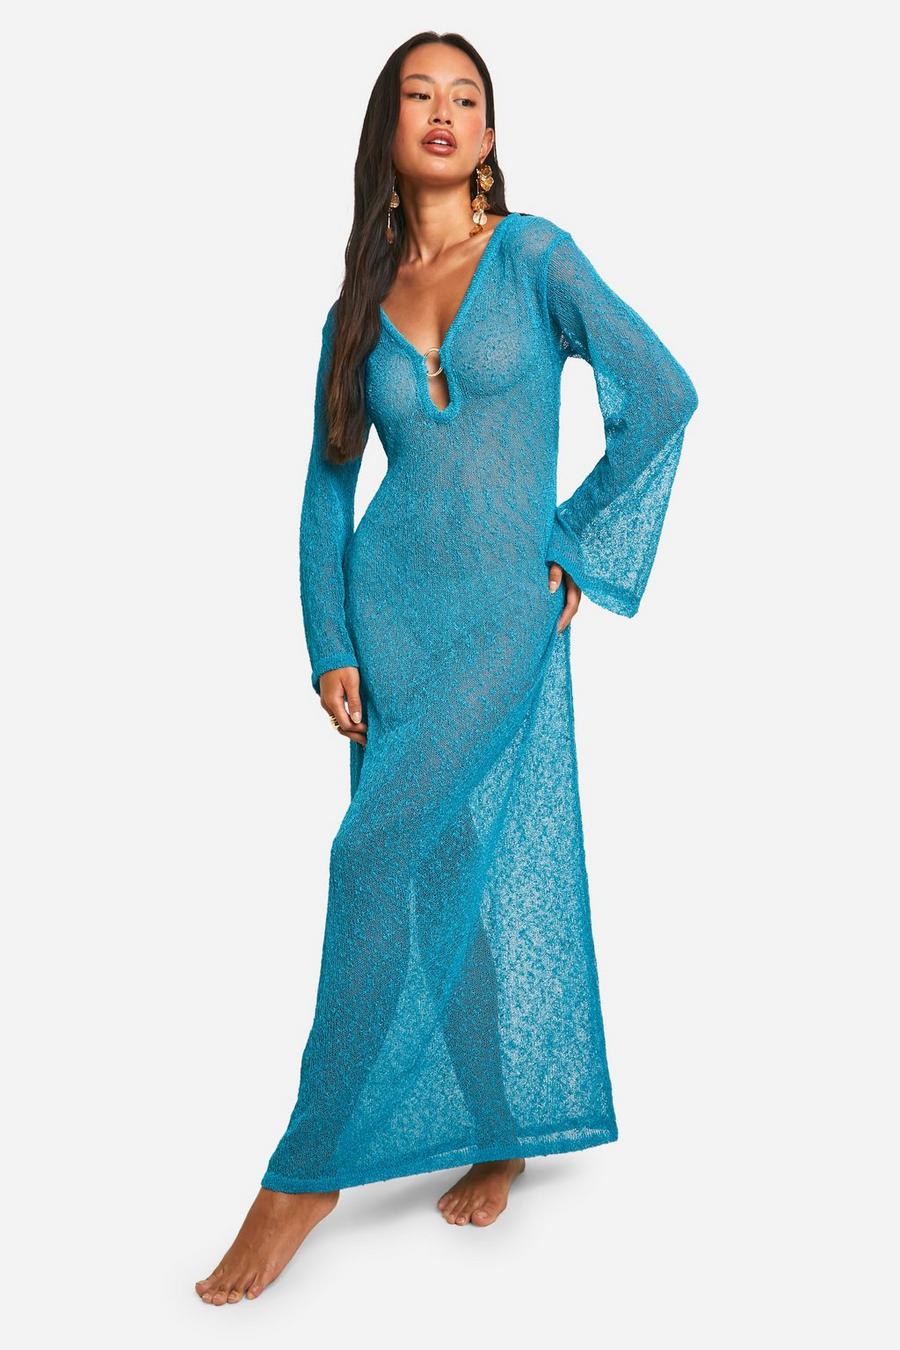 Blue Popcorn Crochet O-ring Beach Cover-up Maxi Dress image number 1